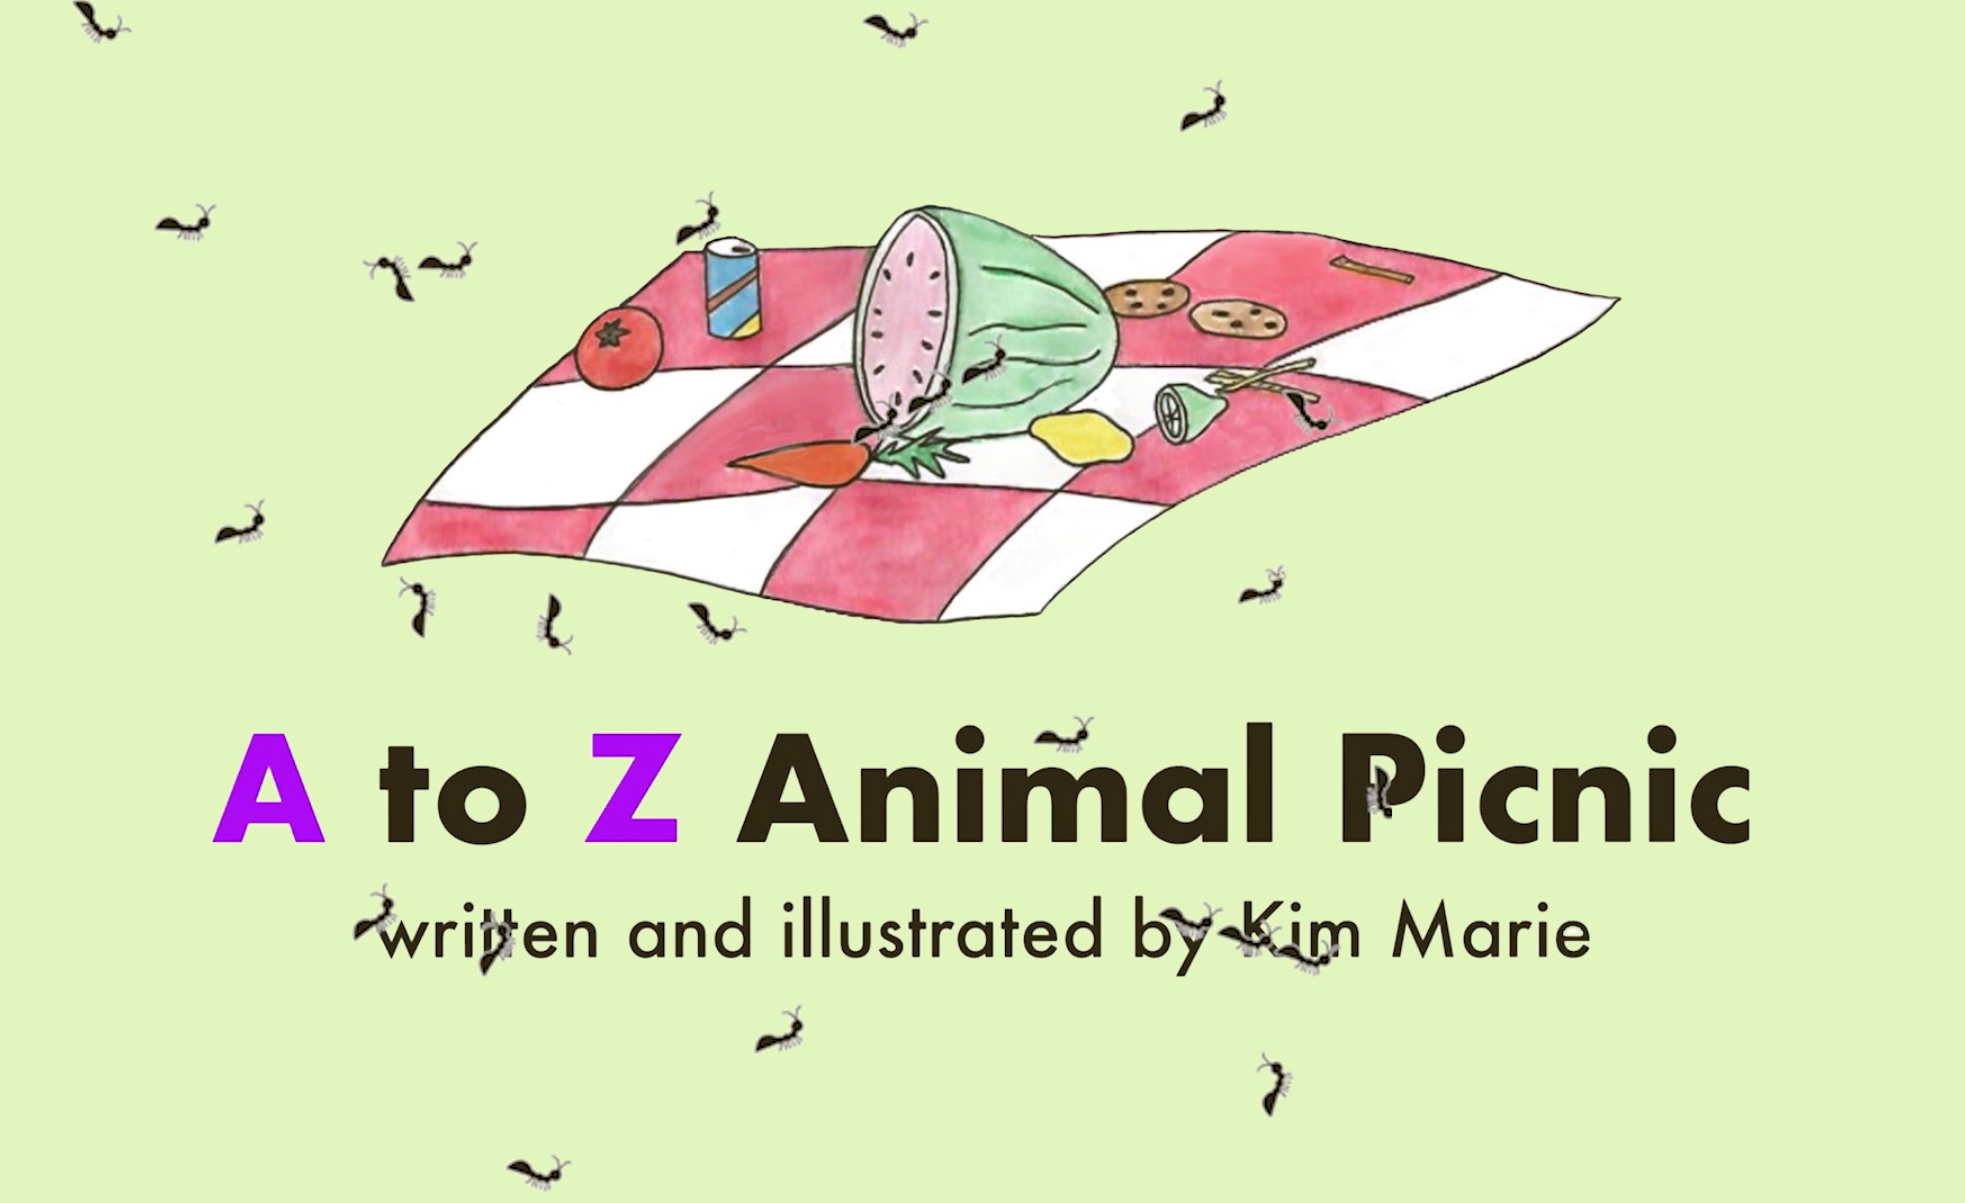 Video Trailer of A to Z Animal Picnic